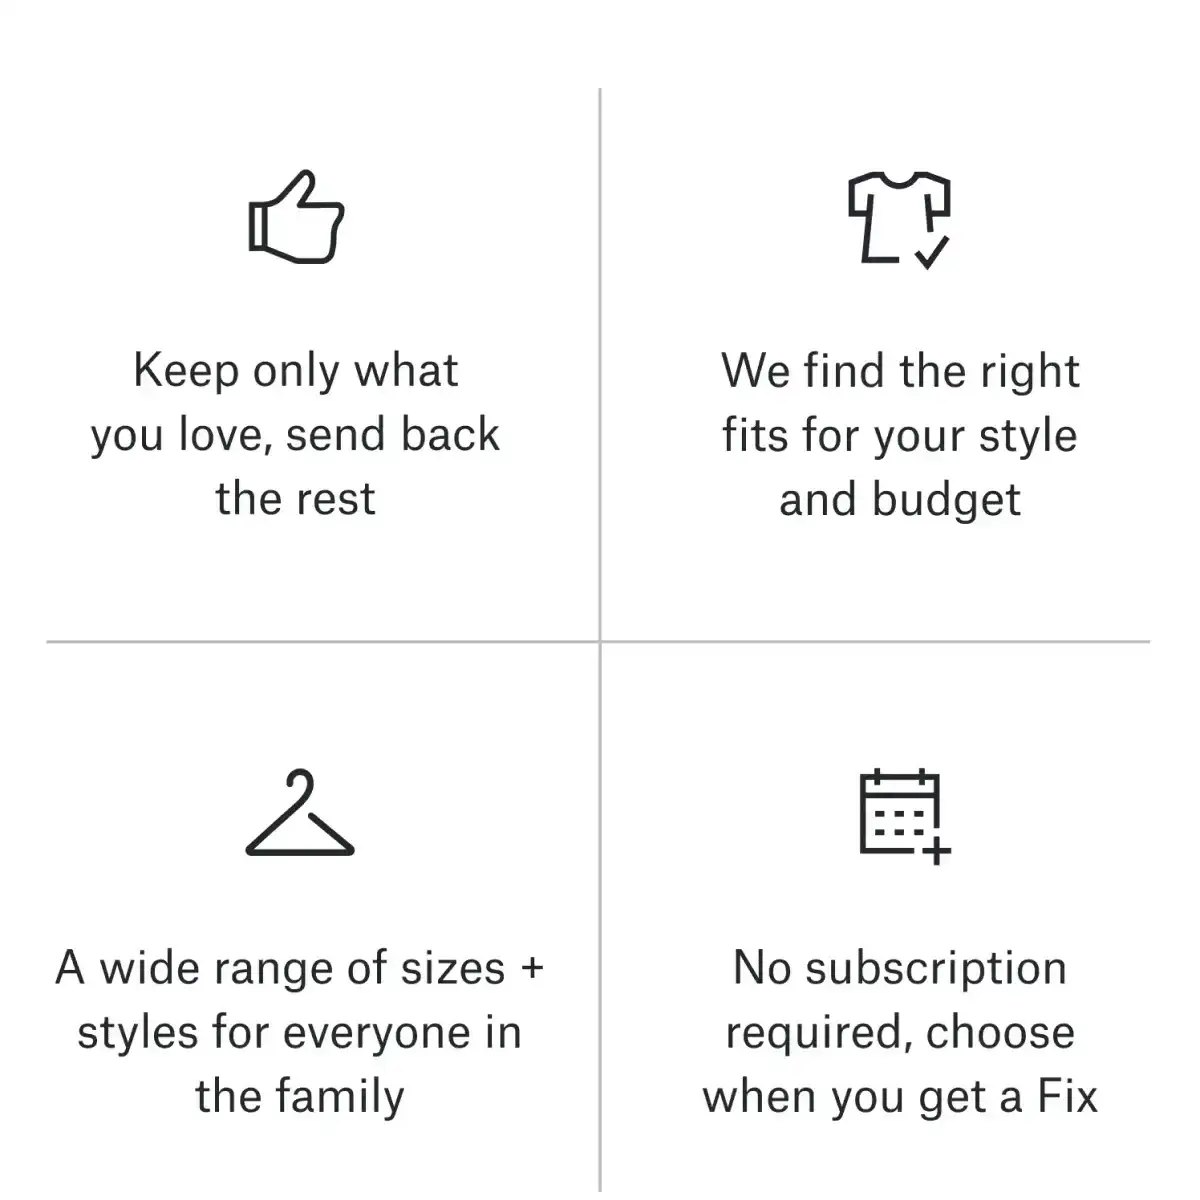 👍 Keep only what you love, send back the rest. 👕 We find the right fits for your style and budget. 👪 A wide range of sizes + styles for everyone in the family. 📅 No subscription required, choose when you get a Fix.